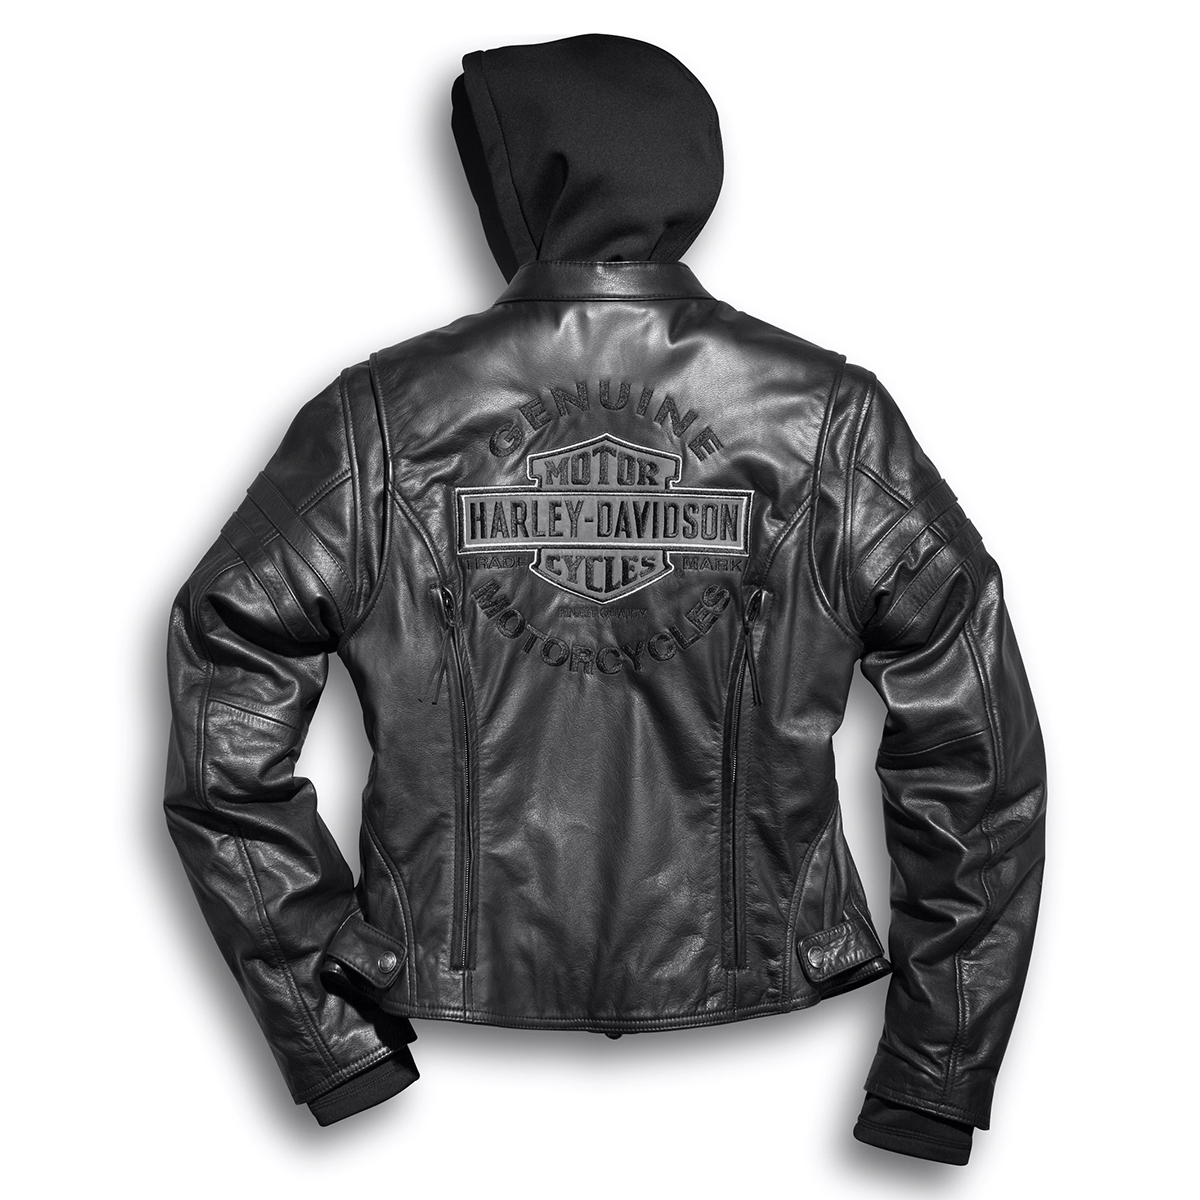 Harley-Davidson Miss Enthusiast Women's 3-in-1 Leather Jacket